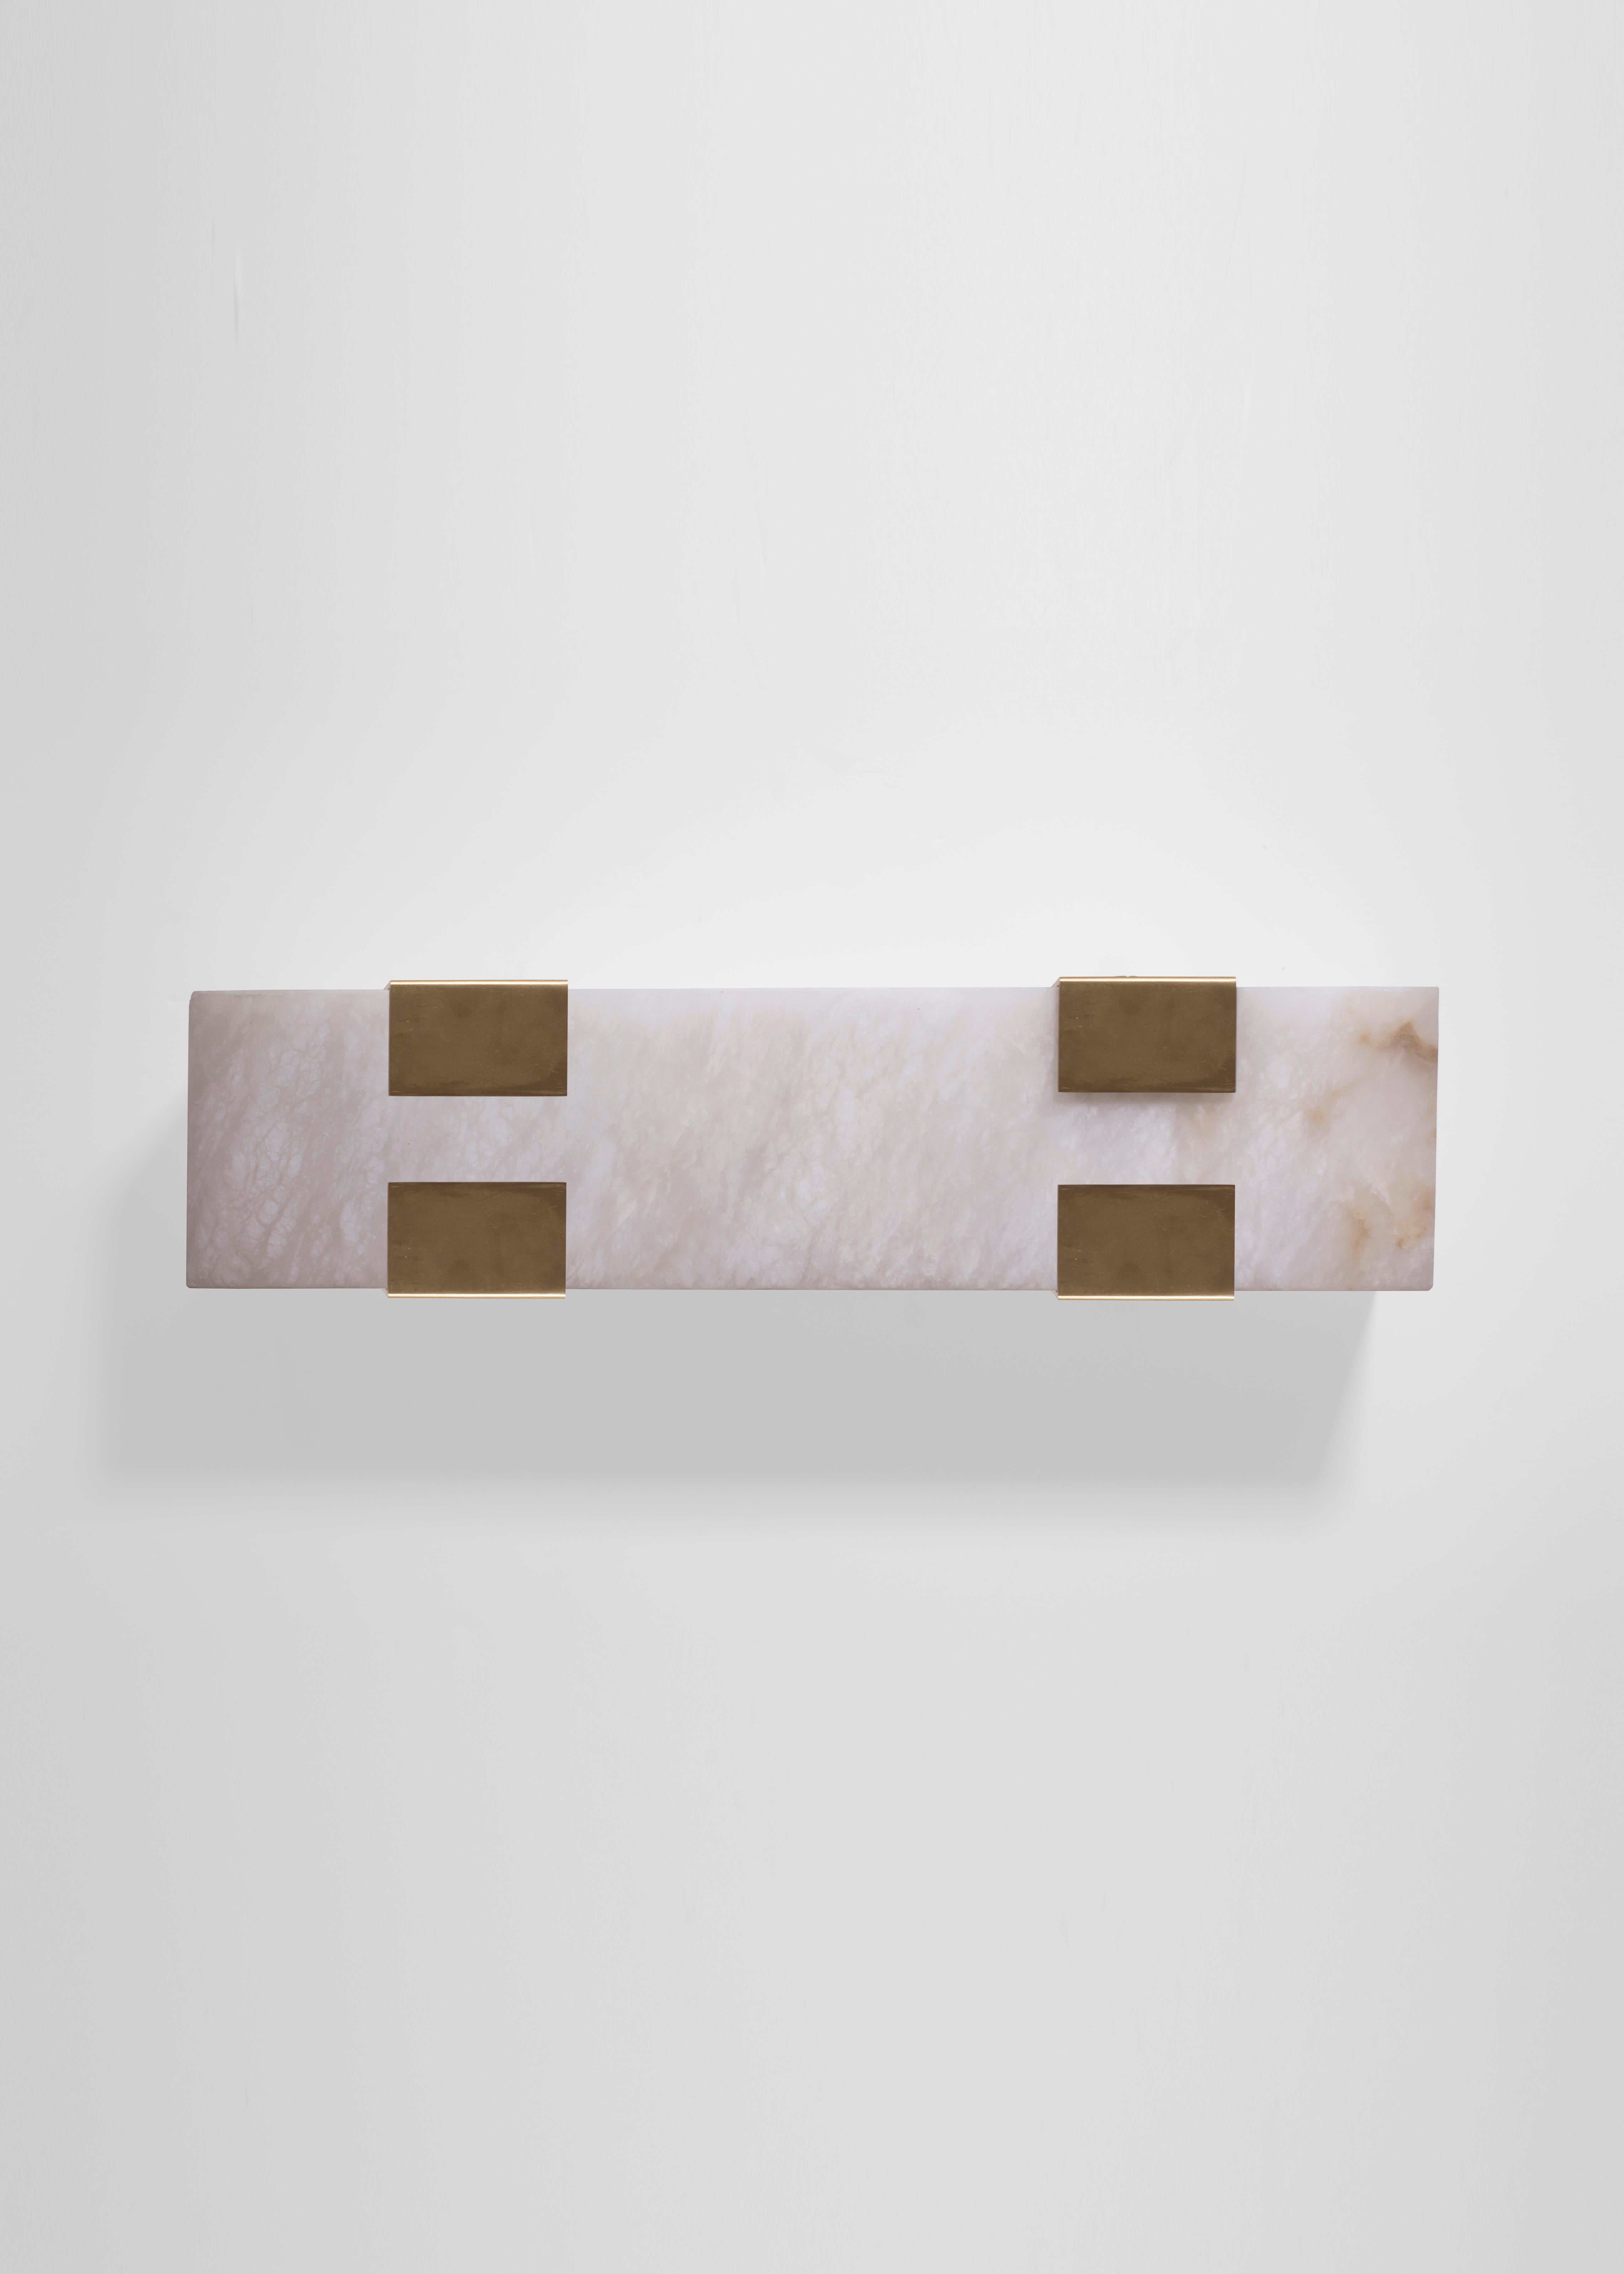 Orphan Work 003-4C Sconce, 2018
Shown in brushed brass and alabaster 
Available in brushed brass, brushed nickel and blackened brass. 
Measures: 19” H x 5 3/8” W x 3 7/8” D
Wall or ceiling mount
Vertical or horizontal
Plug-in by request
1-4